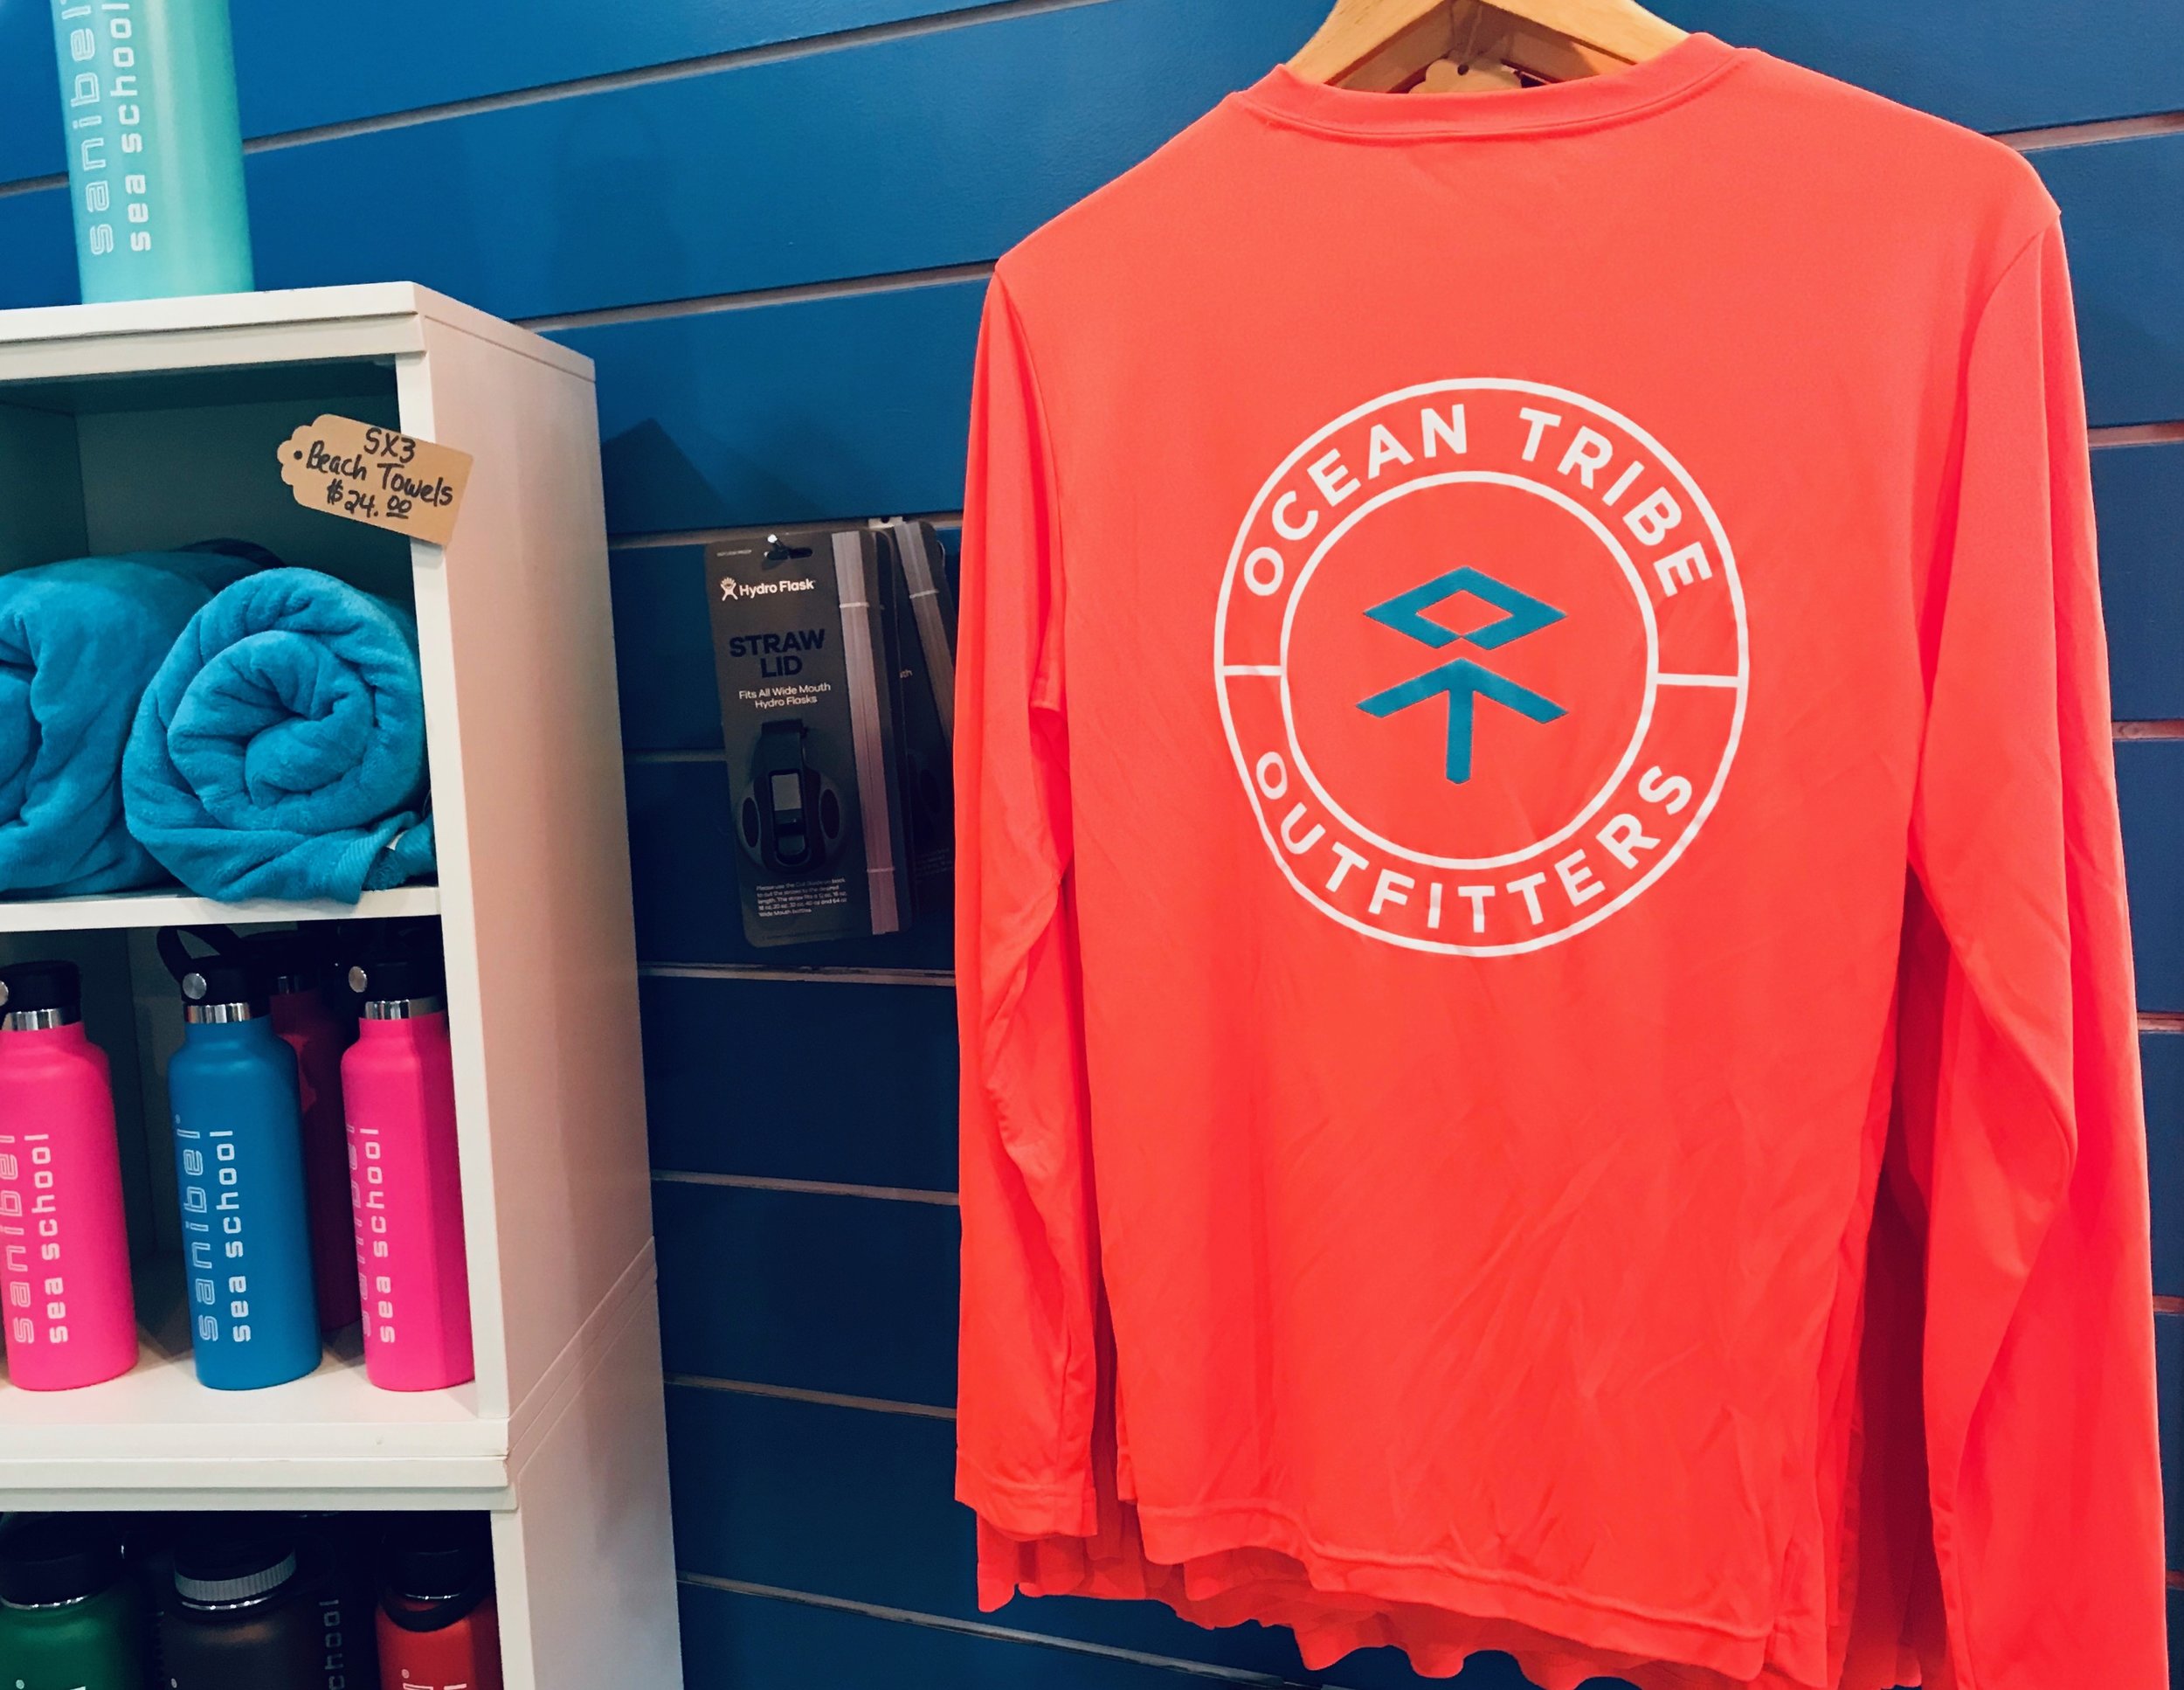 Long sleeve performance shirts are great for summer camp and days on the water.